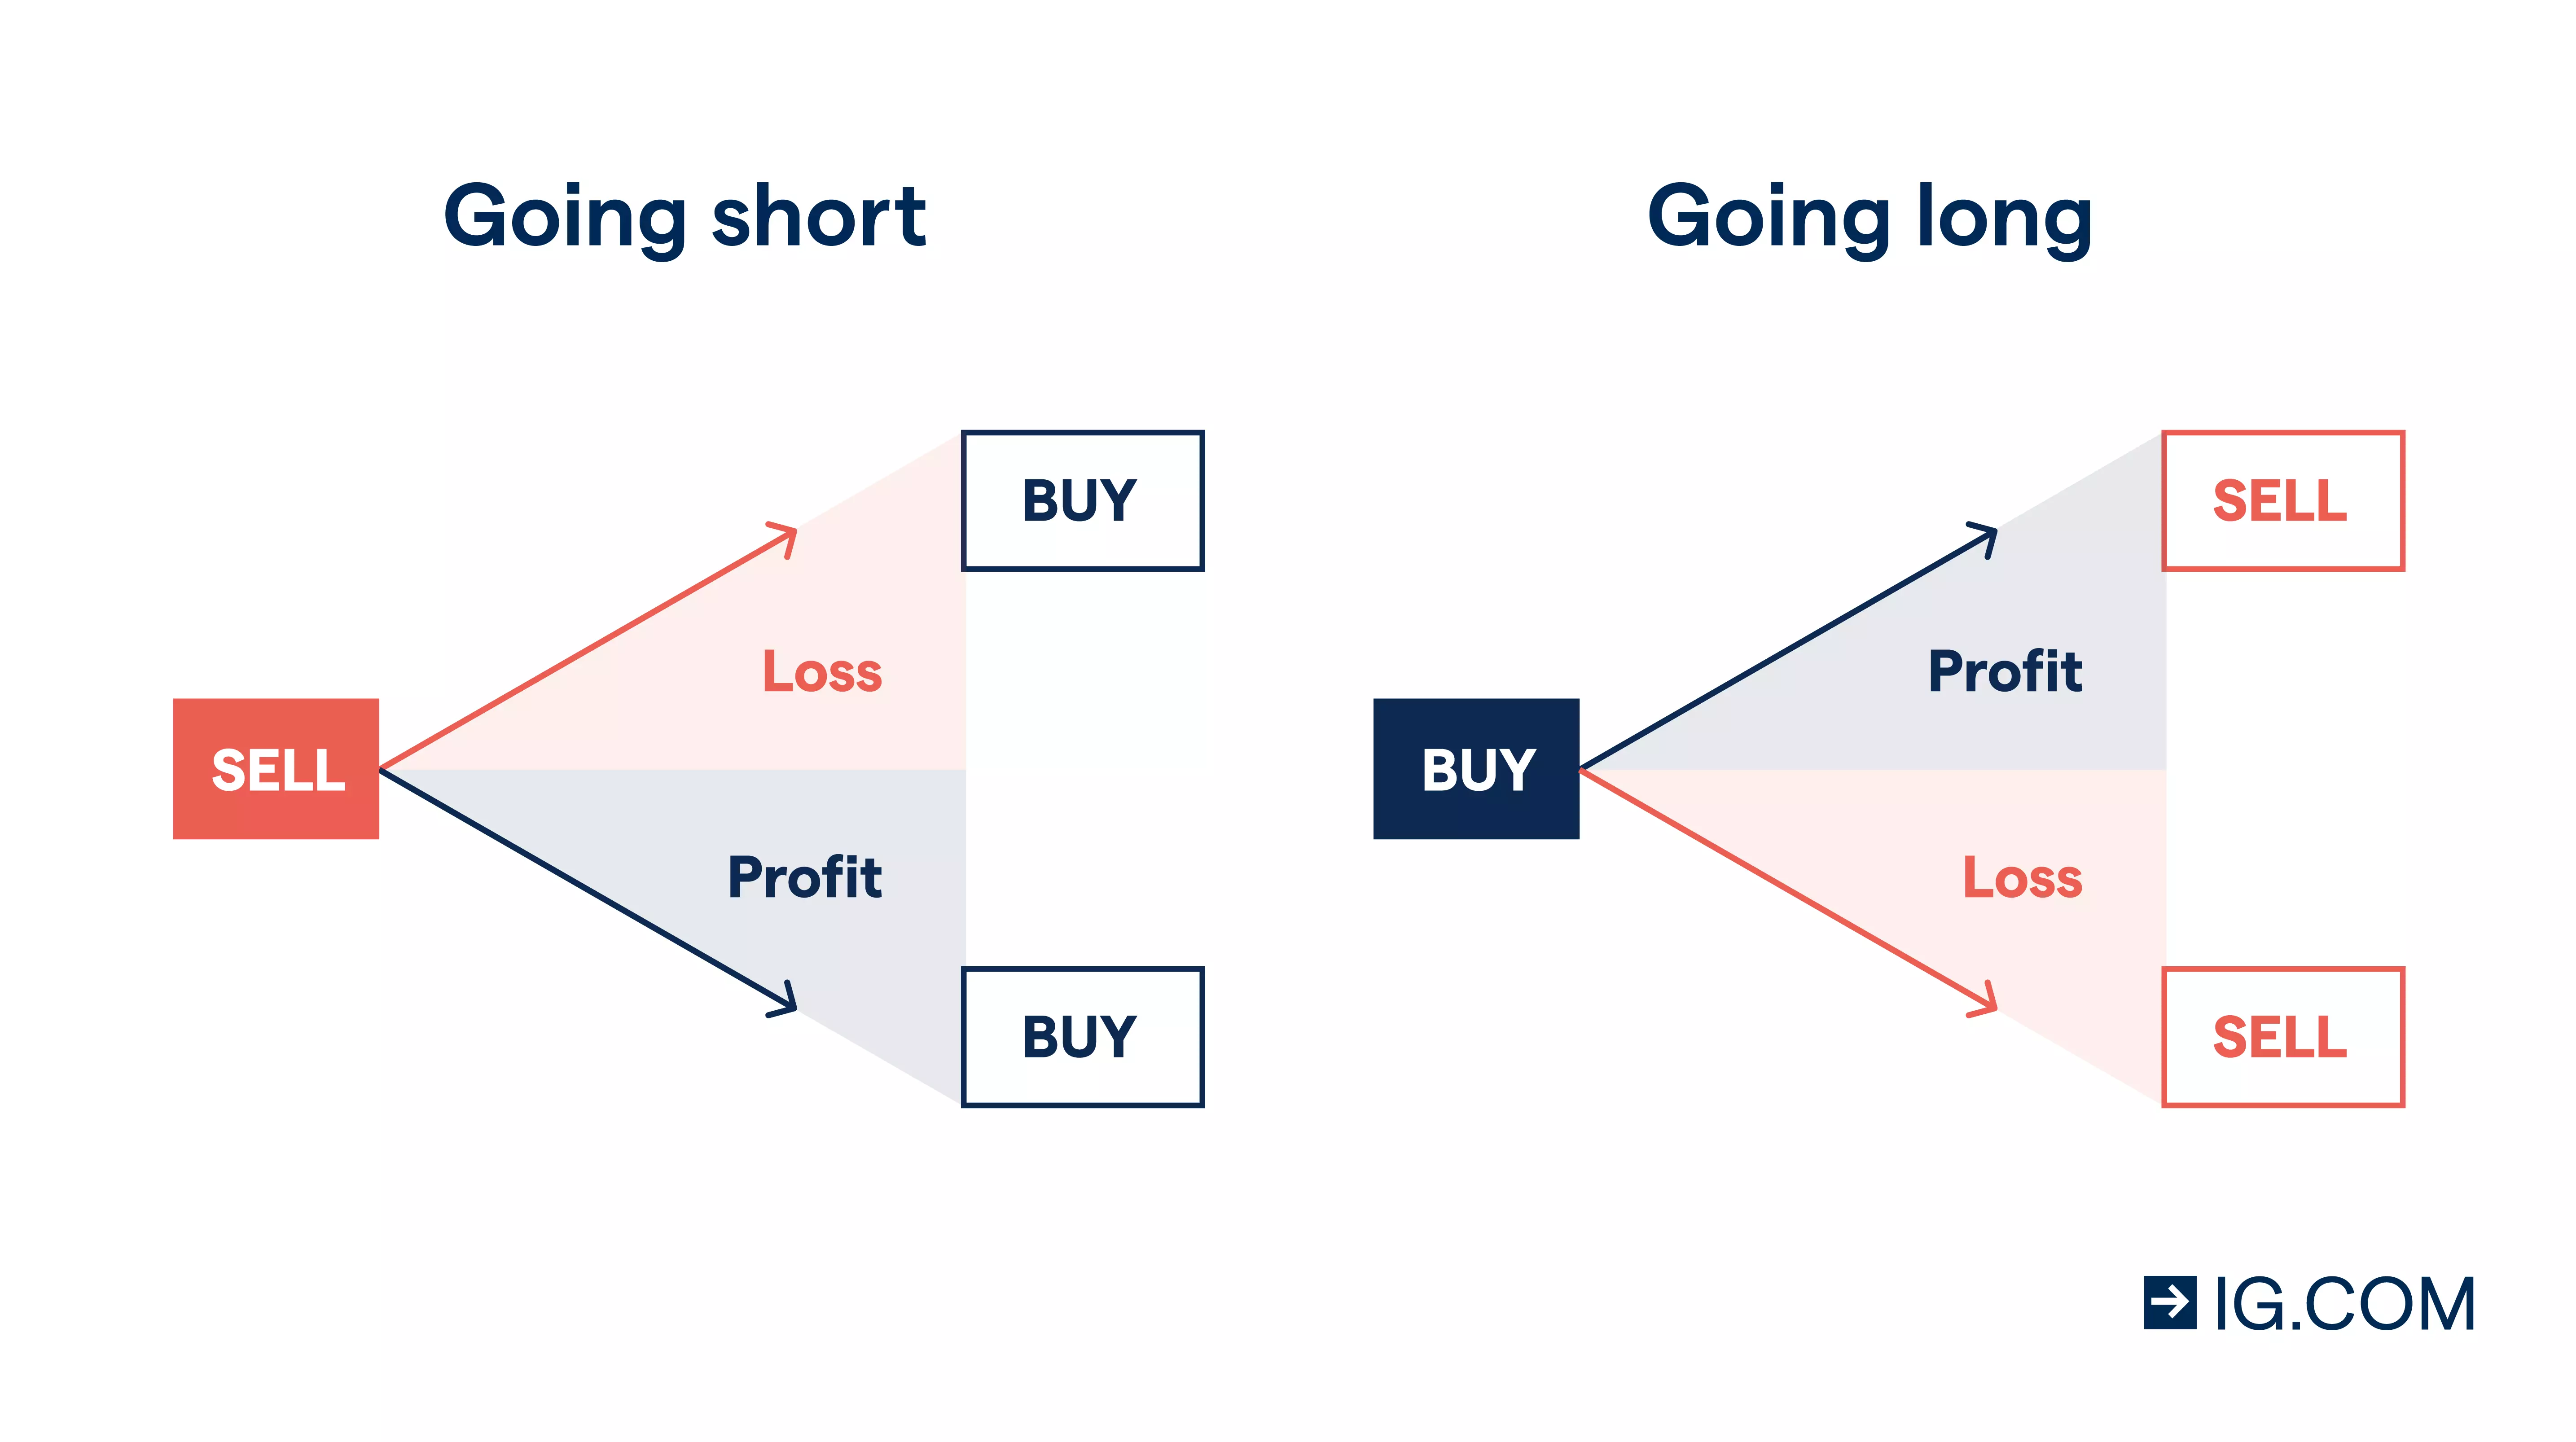 Image showing how a profit is made and how loss is incurred when you go long by buying or go short through selling an asset.